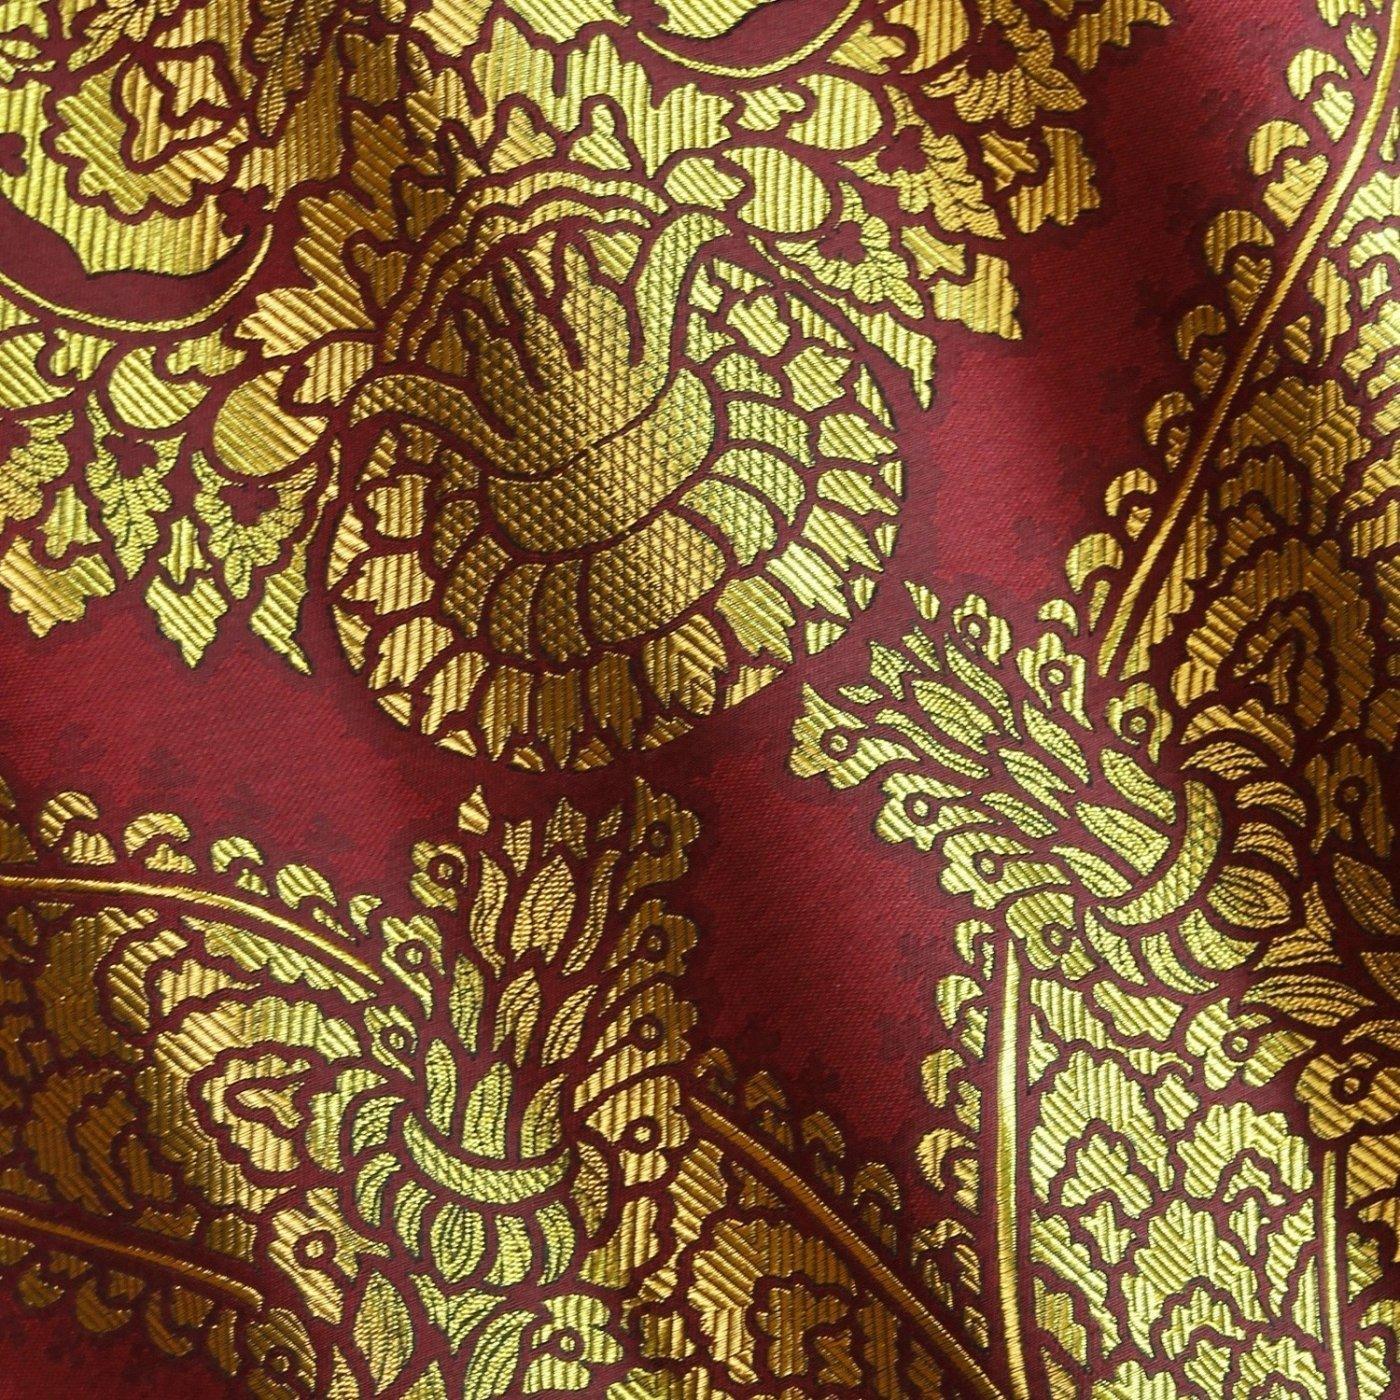 Embroidered Minster Cope in Red/Gold Memlinc with Red Velvet Orphreys - Watts & Co. (international)